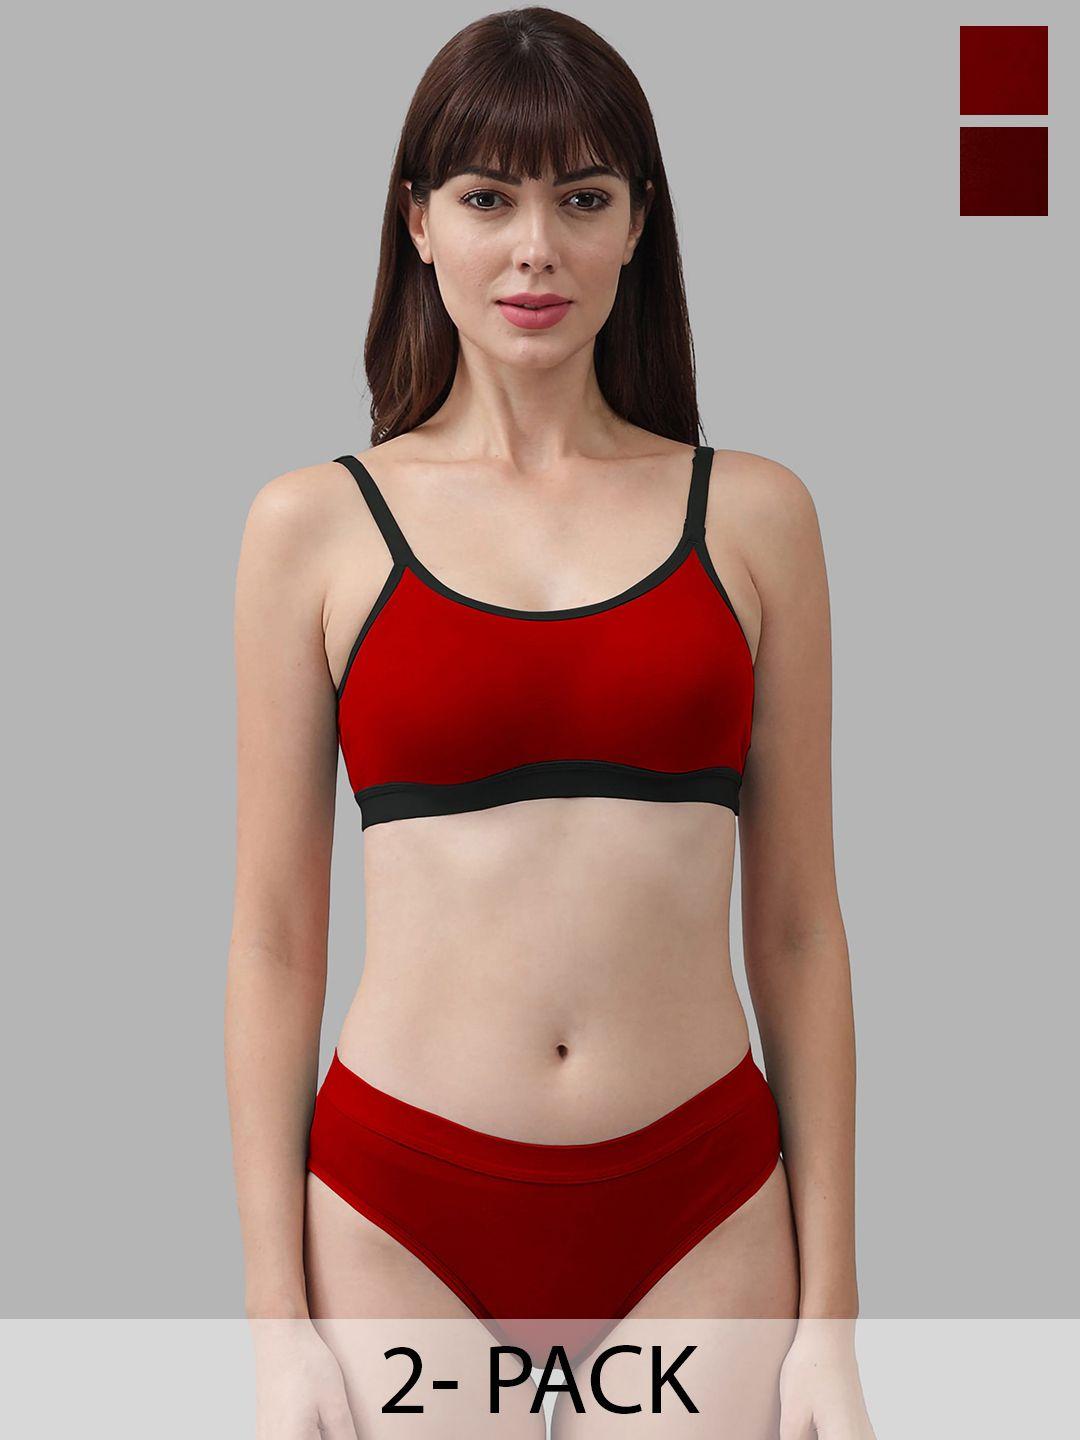 in-curve pack of 2 cotton lingerie set ea_cnora set_red,maroon